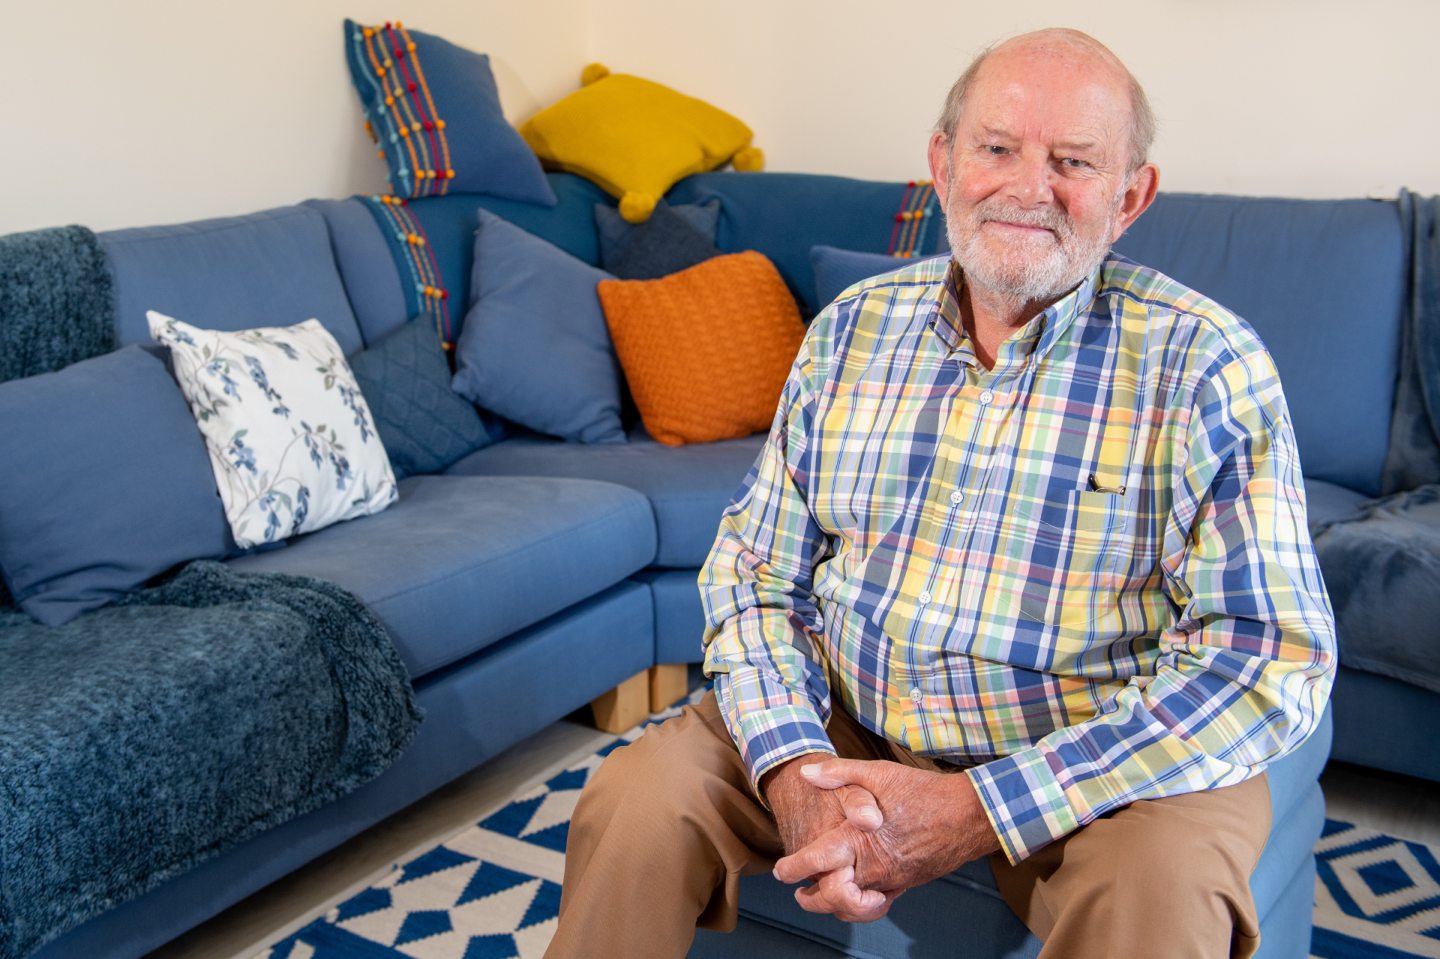 Geoff in his living room. He's been speaking about the impact of osteoporosis on men